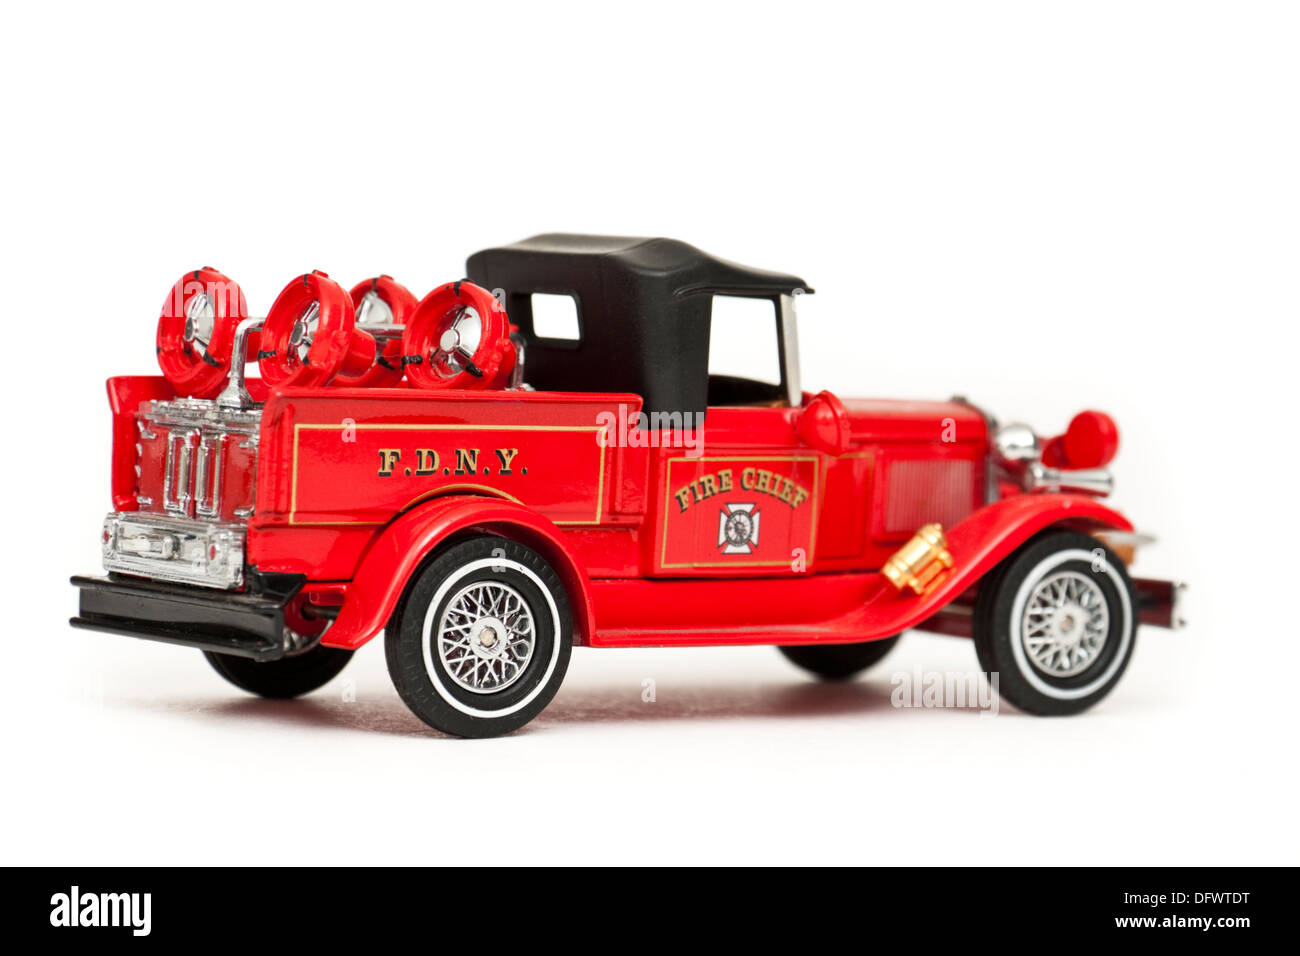 Matchbox replica of vintage / antique New York Fire Department 'Fire Chief' truck Stock Photo